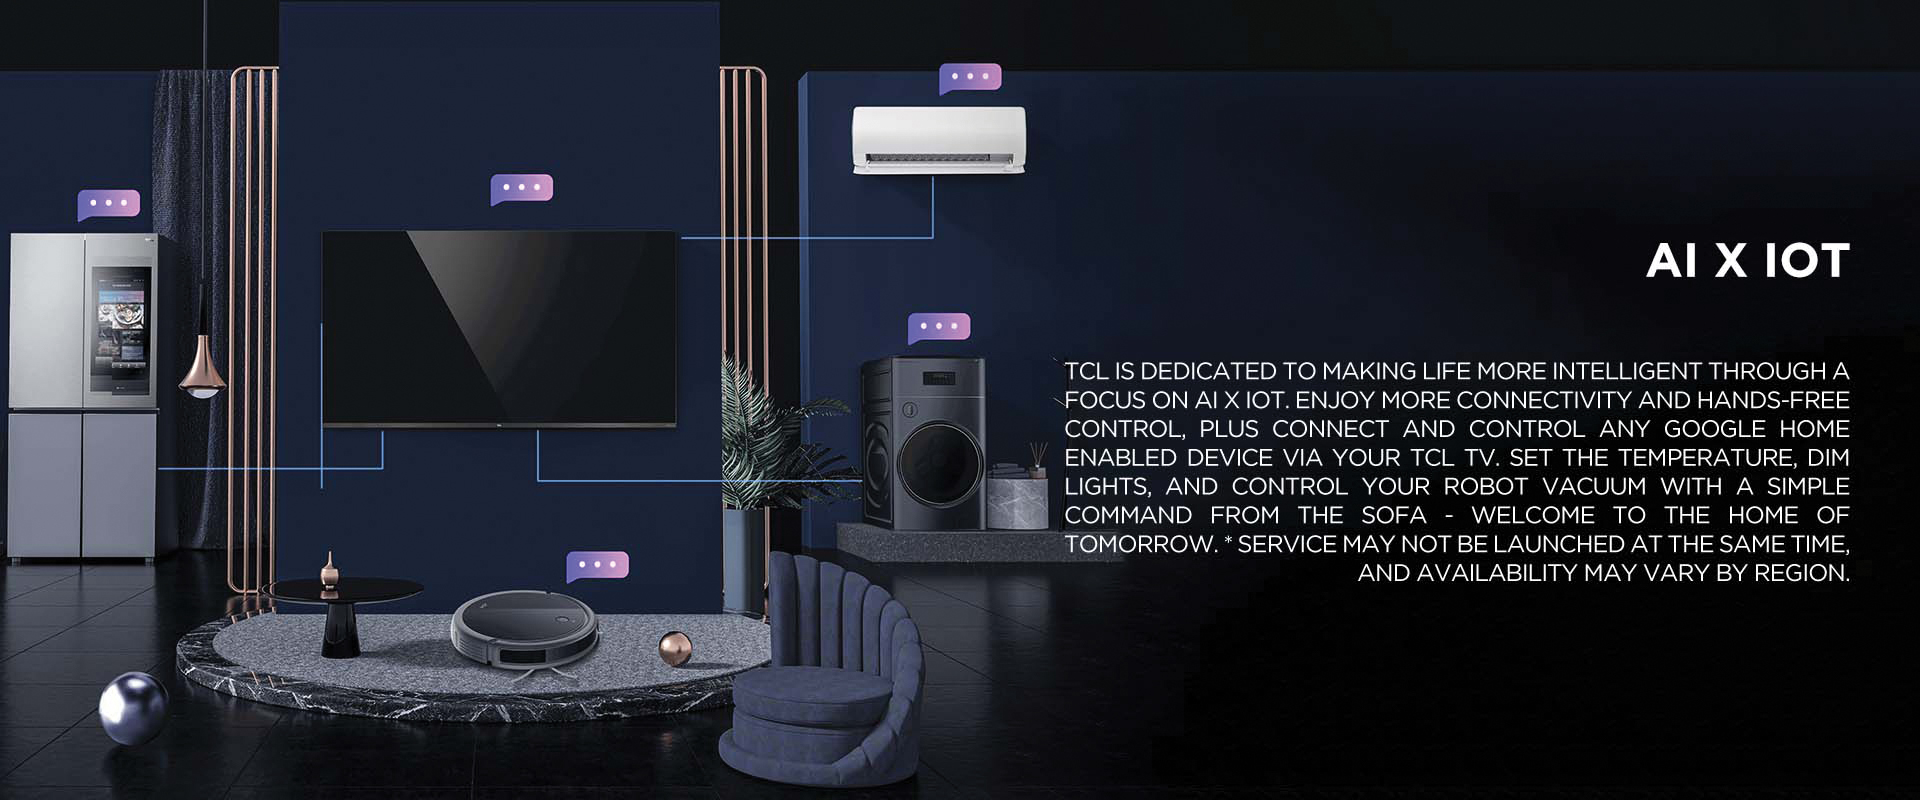 AI x IoT - TCL is dedicated to making life more intelligent through a focus on AI x IoT. Enjoy more connectivity and hands-free control, plus connect and control any Google Home enabled device via your TCL TV. Set the temperature, dim lights, and control your robot vacuum with a simple command from the sofa - welcome to the home of tomorrow. * Service may not be launched at the same time, and availability may vary by region.